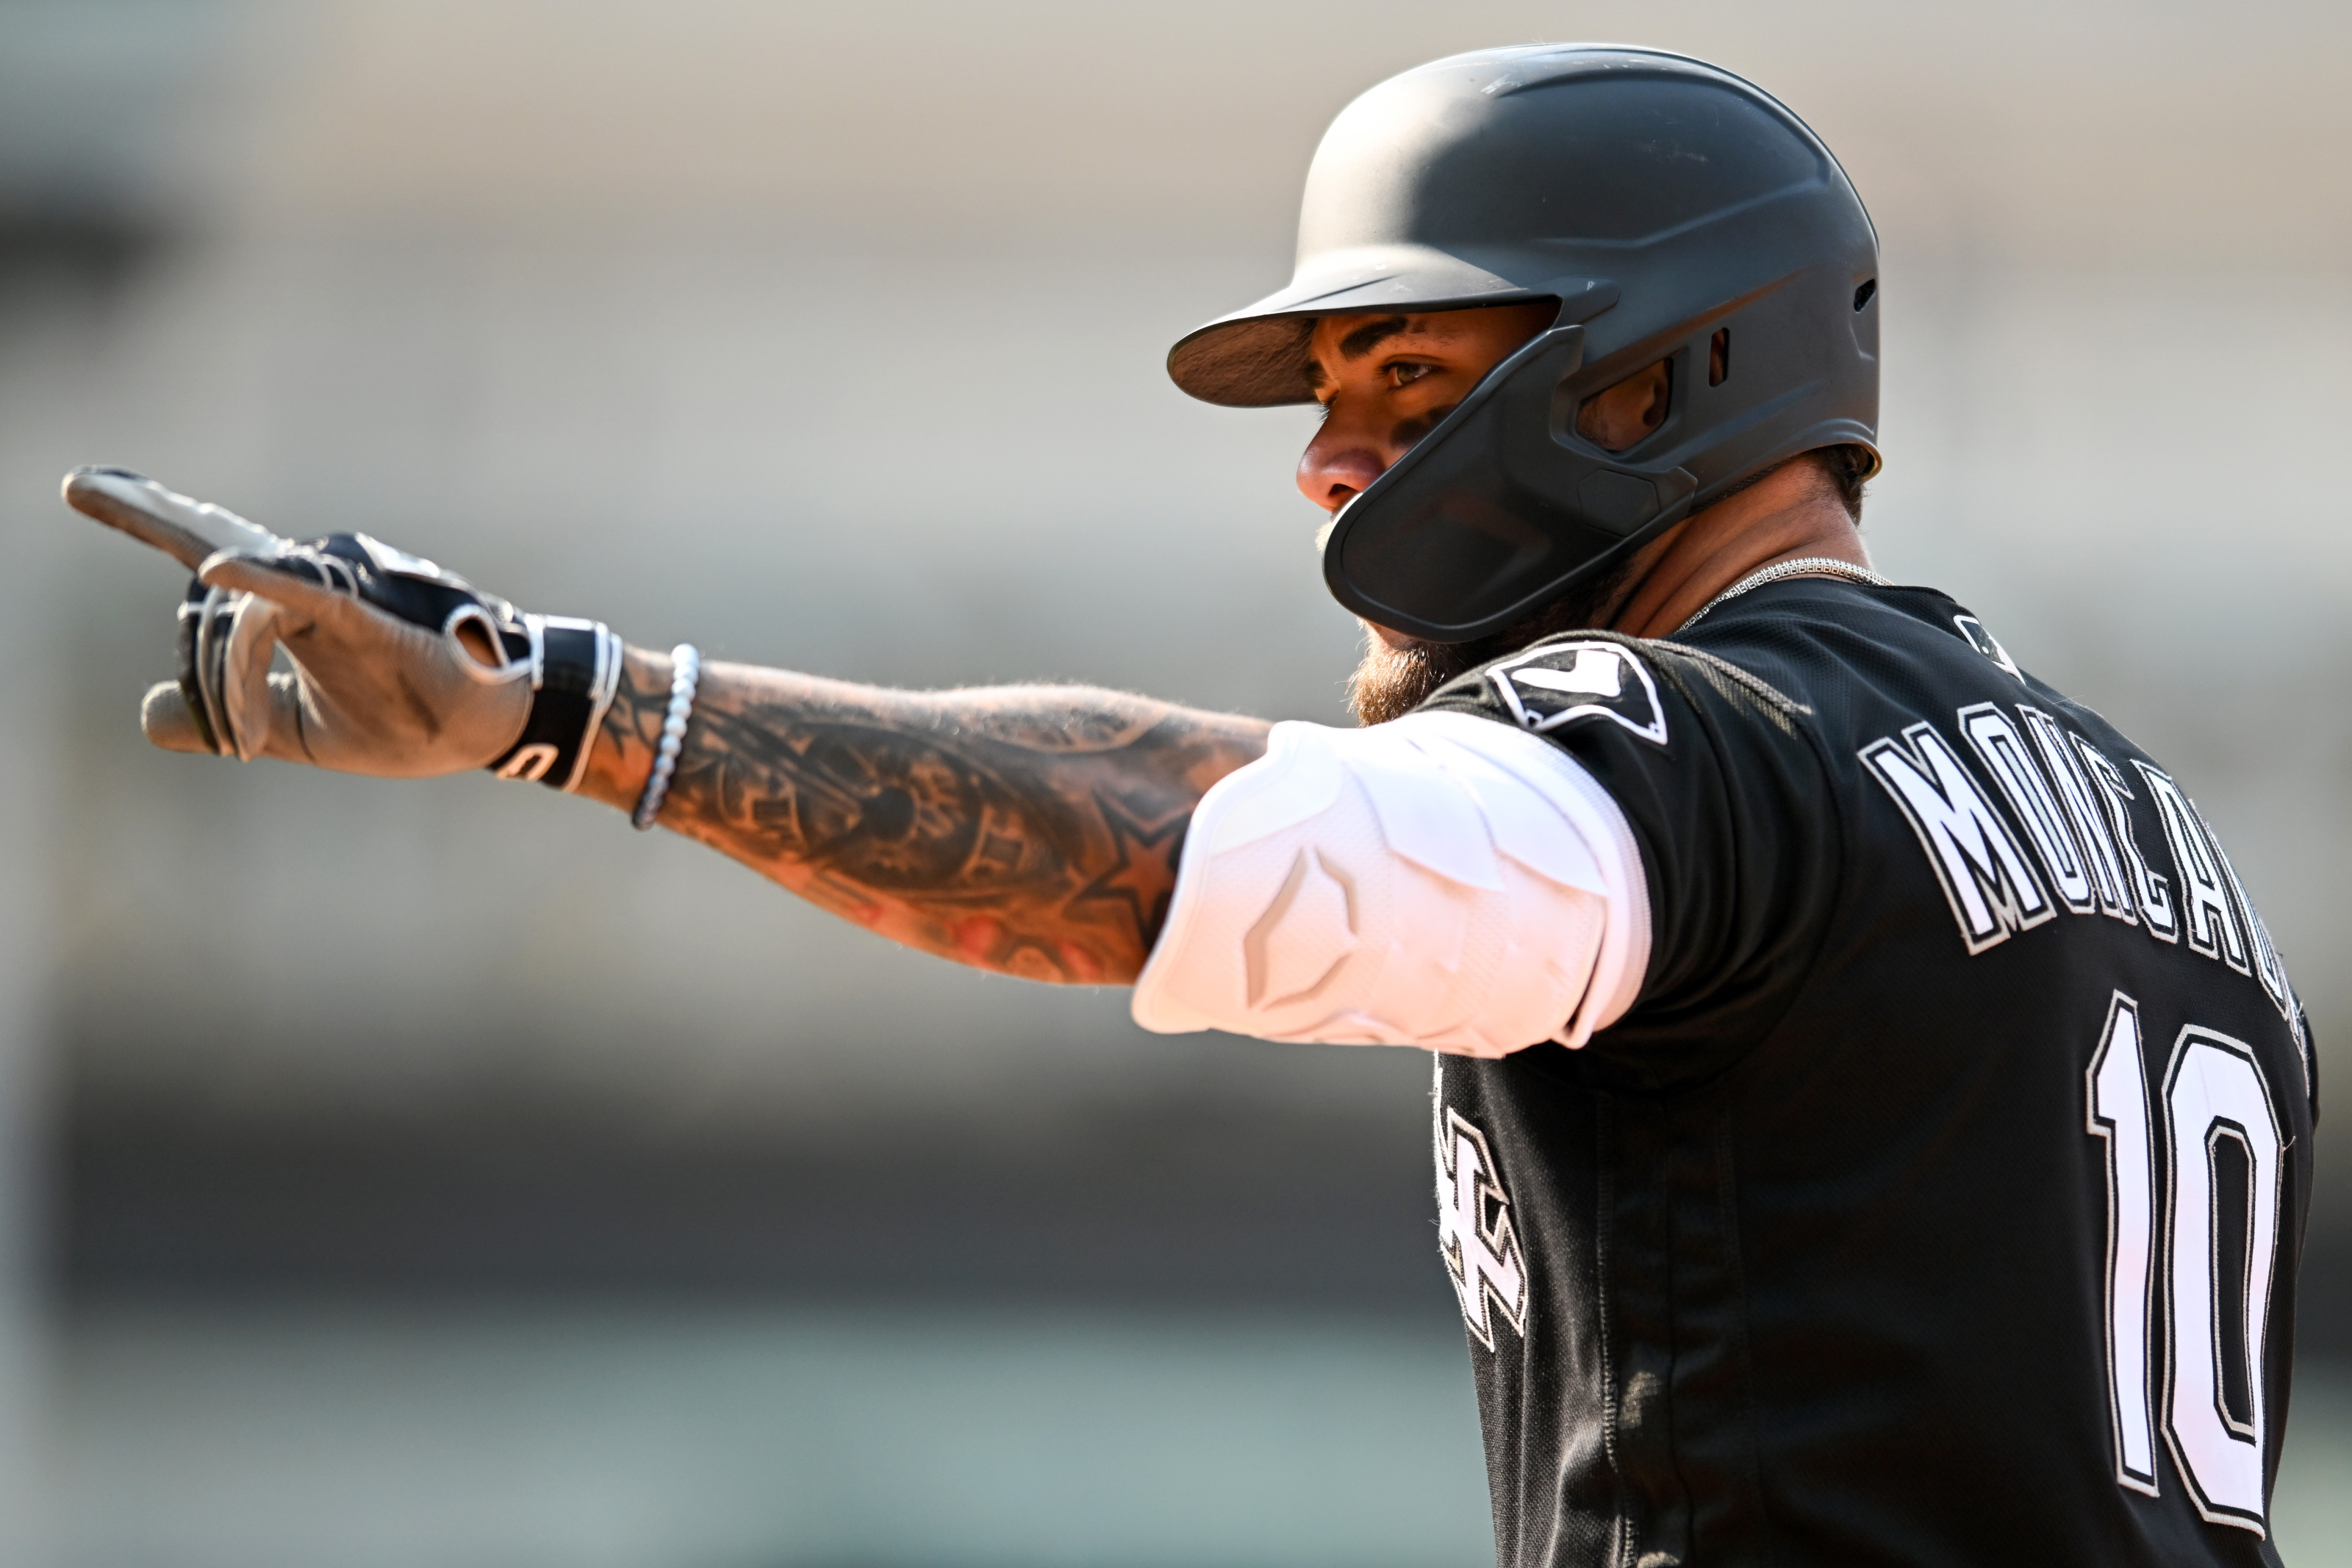 White Sox could get healthy bodies back for road trip - Chicago